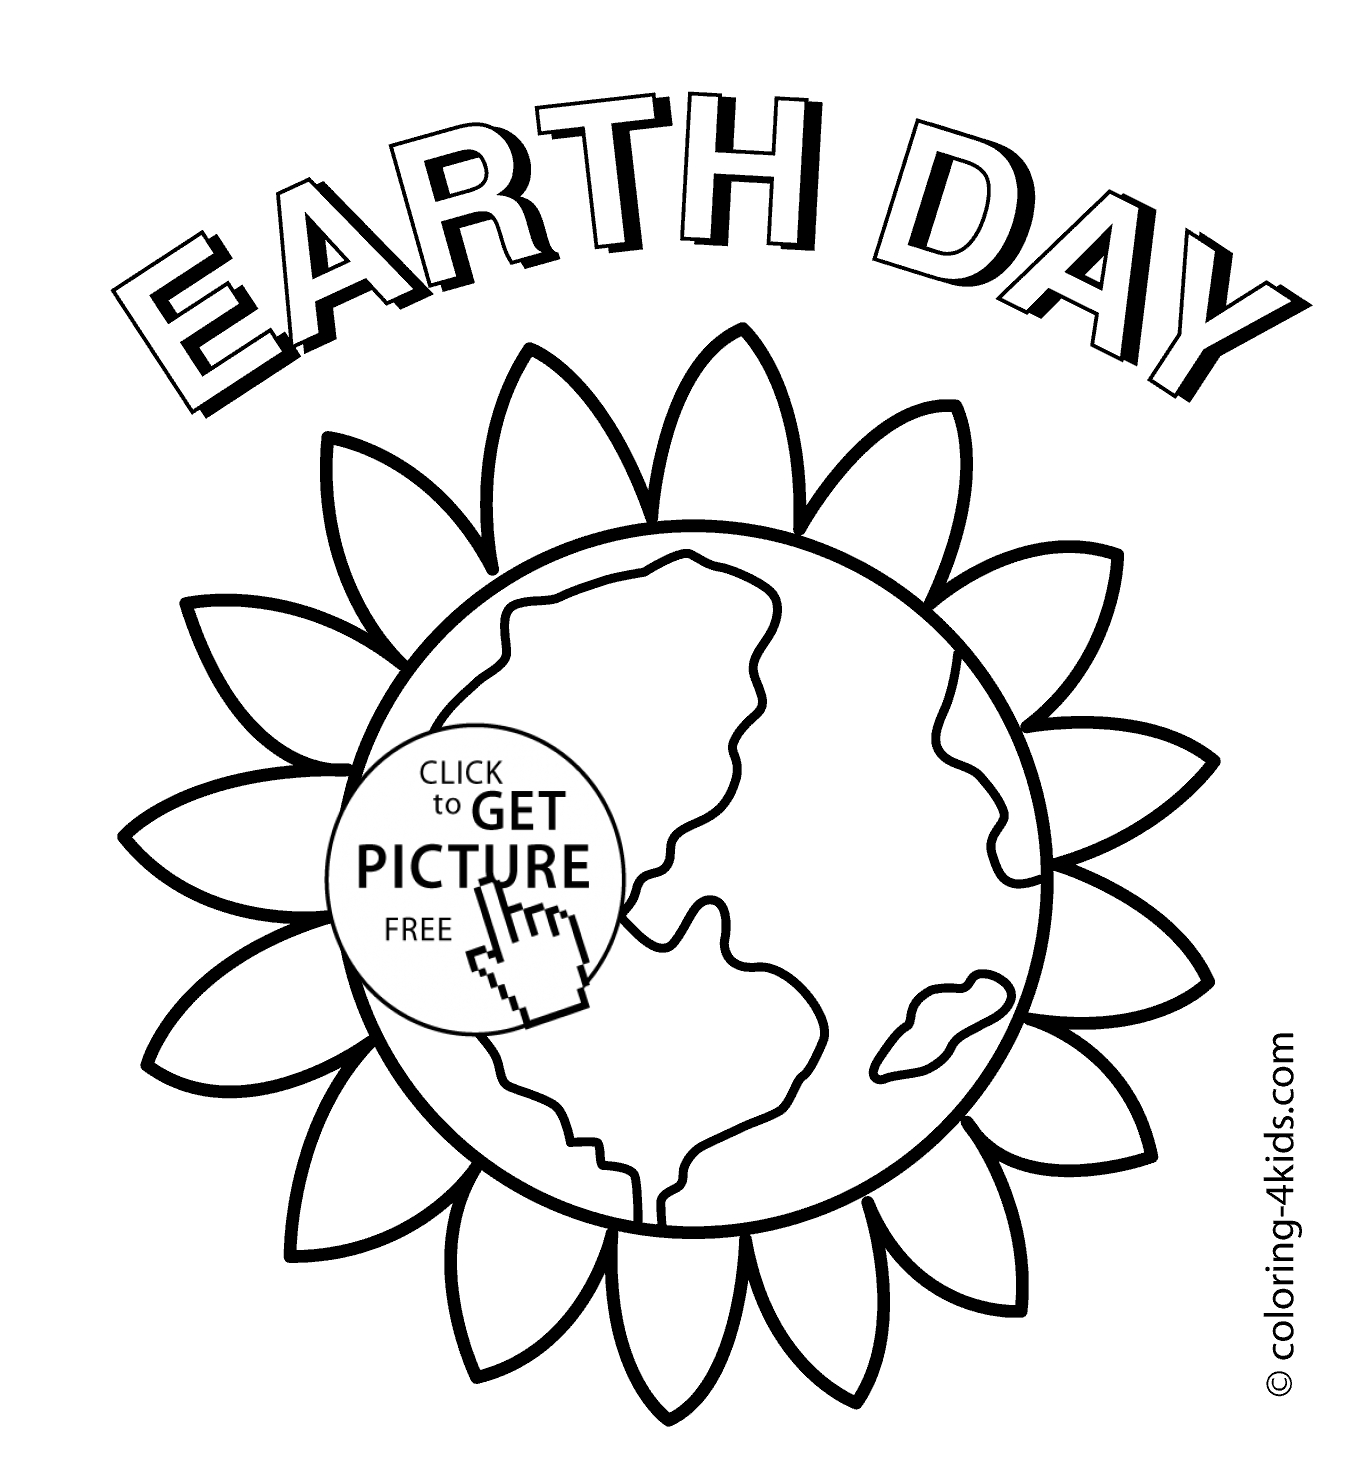 Earth Day Coloring Pages Coloring Pages Earth Day Flower Coloring Pages Outstanding